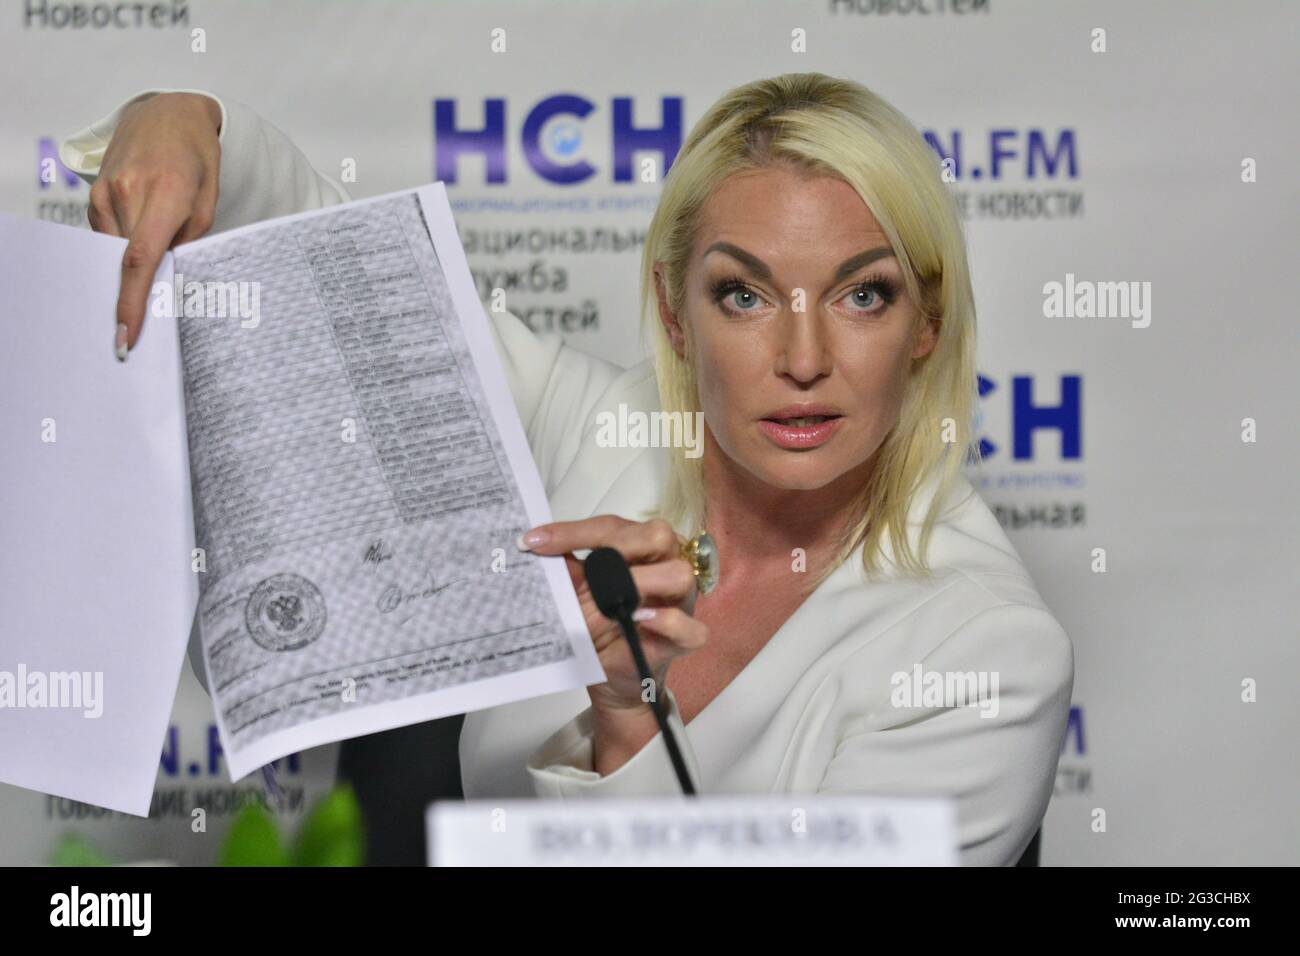 Press conference of the famous Russian ballerina Anastasia Volochkova on the topic of her litigation with the Bolshoi Theater.National News Service Agency, Moscow June 2021. On the picture: Anastasia Volochkova. Photo: